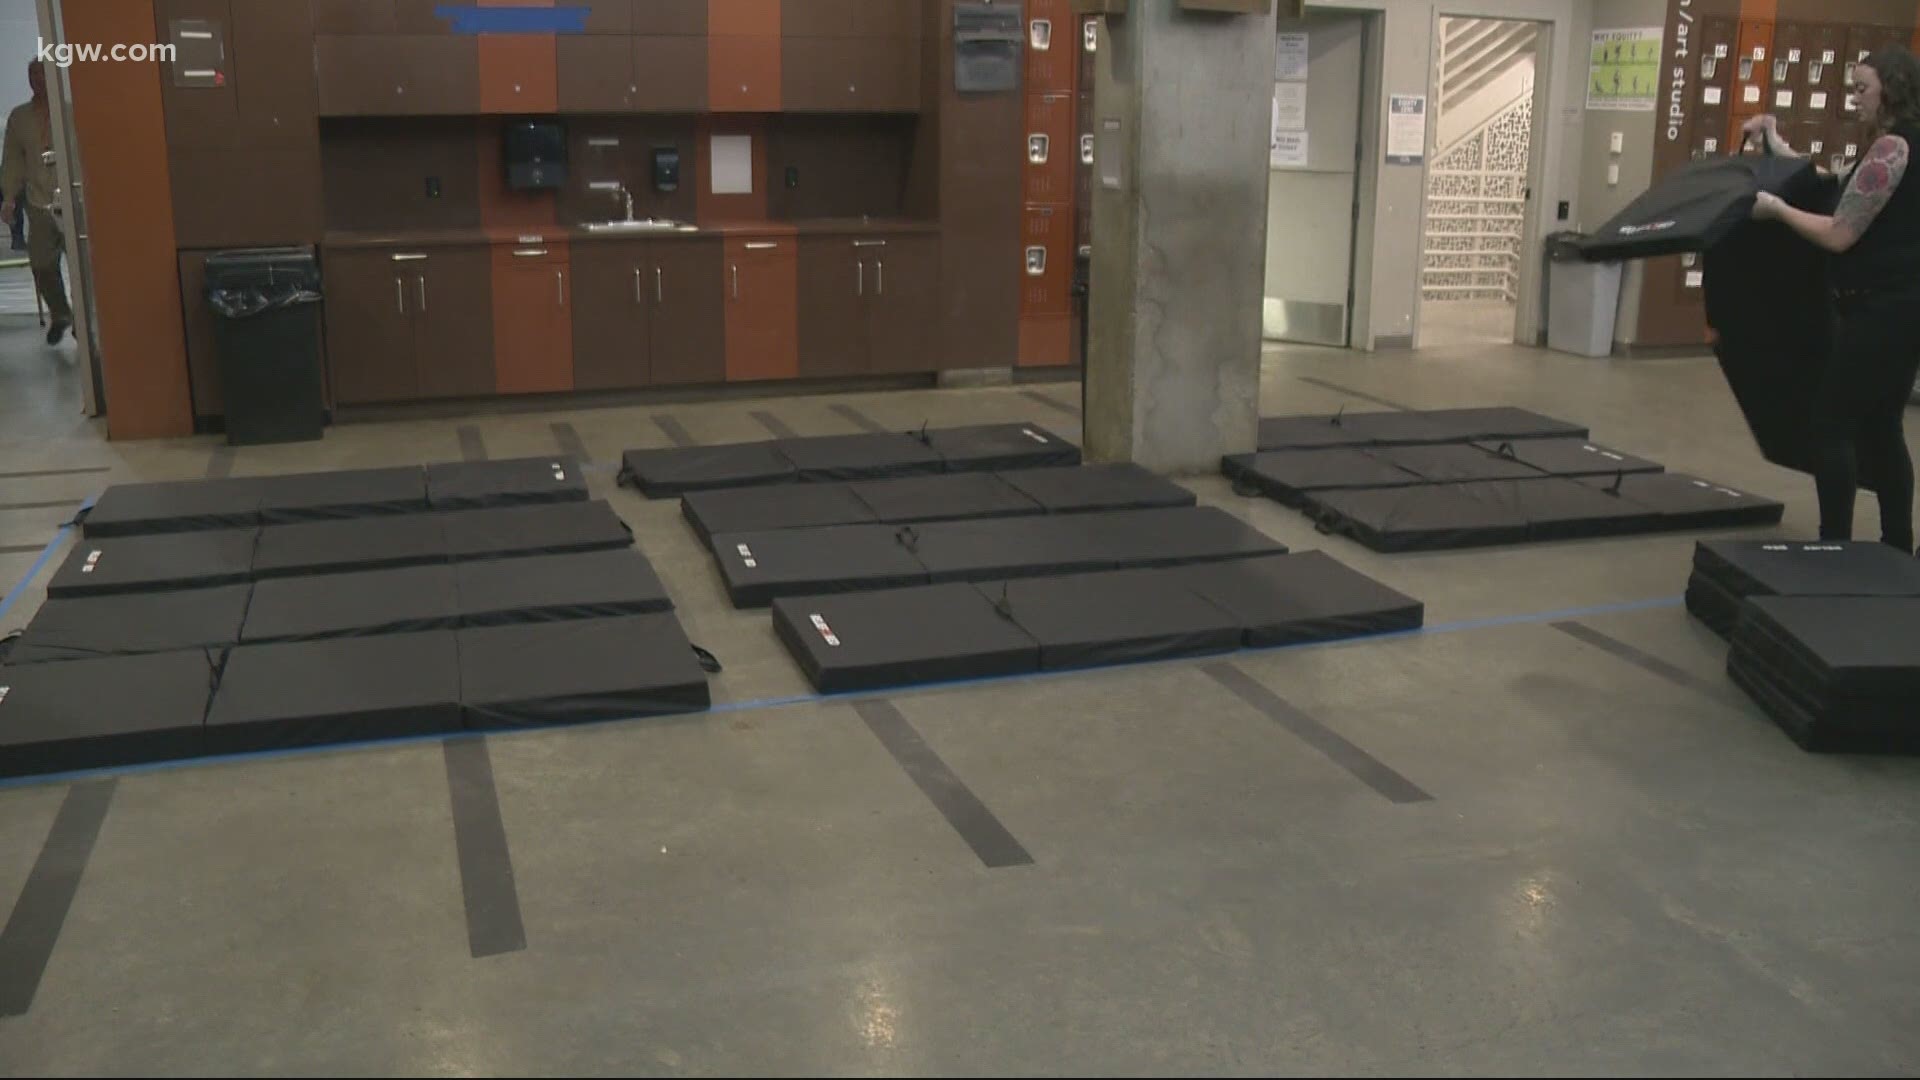 For the first time ever, city and county leaders fear they won't have enough severe weather shelter beds for Portland's homeless this winter.